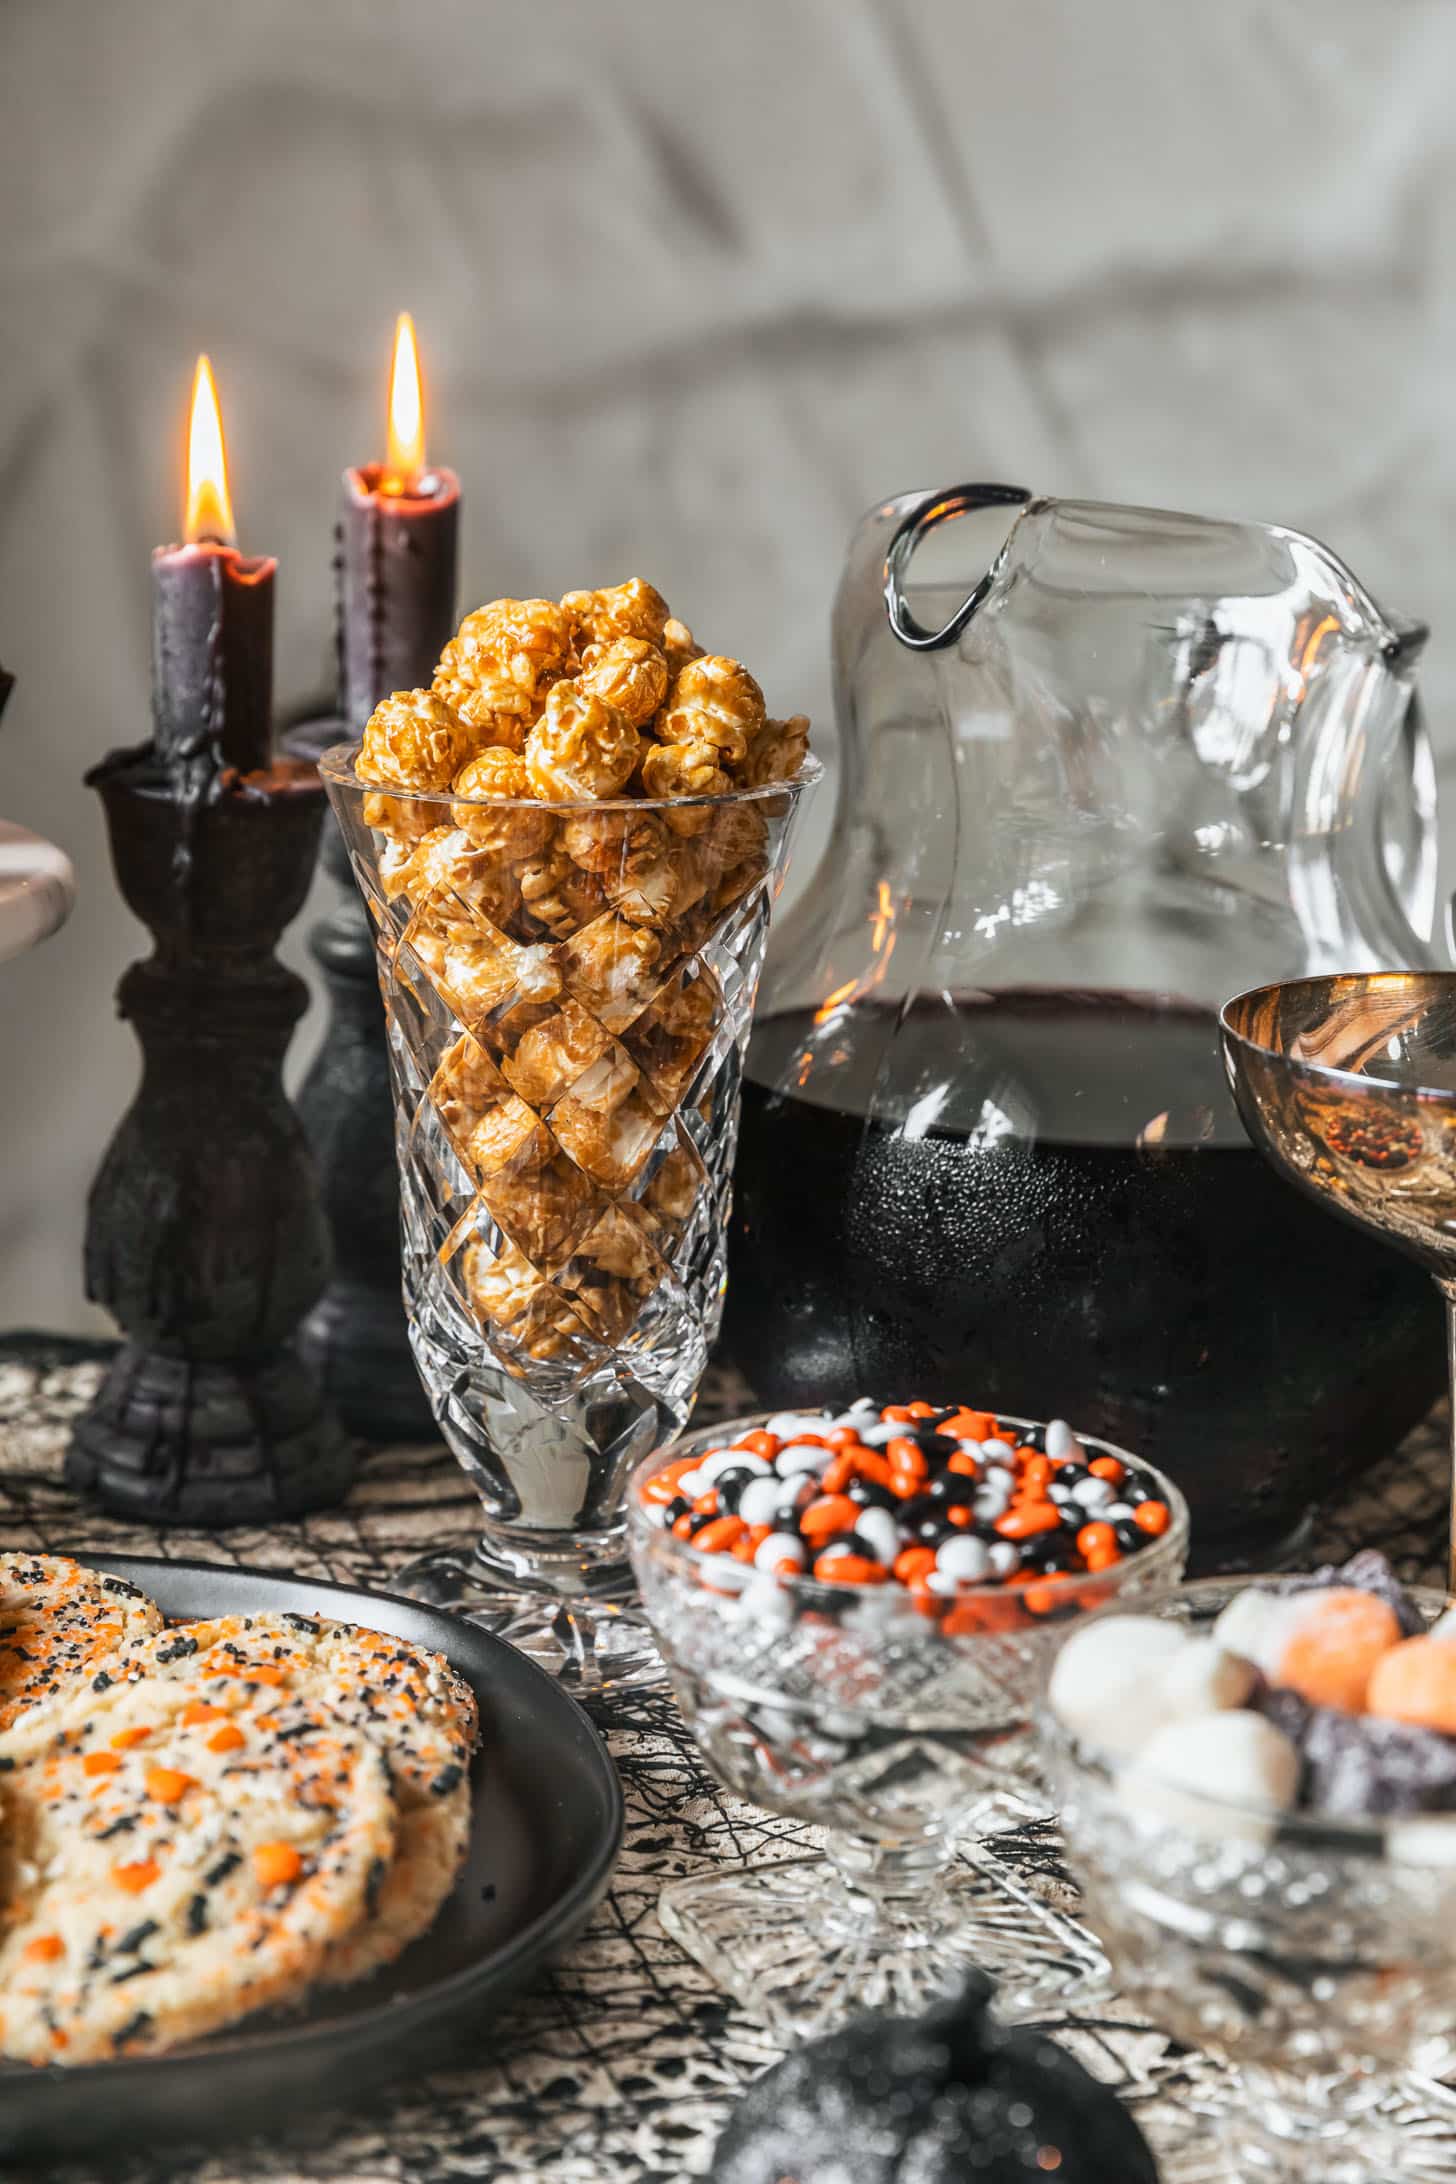 A crystal jar of caramel corn, black plate of cookies, bowls of Halloween candy, and pitcher of black sangria on a black lacy tablecloth.